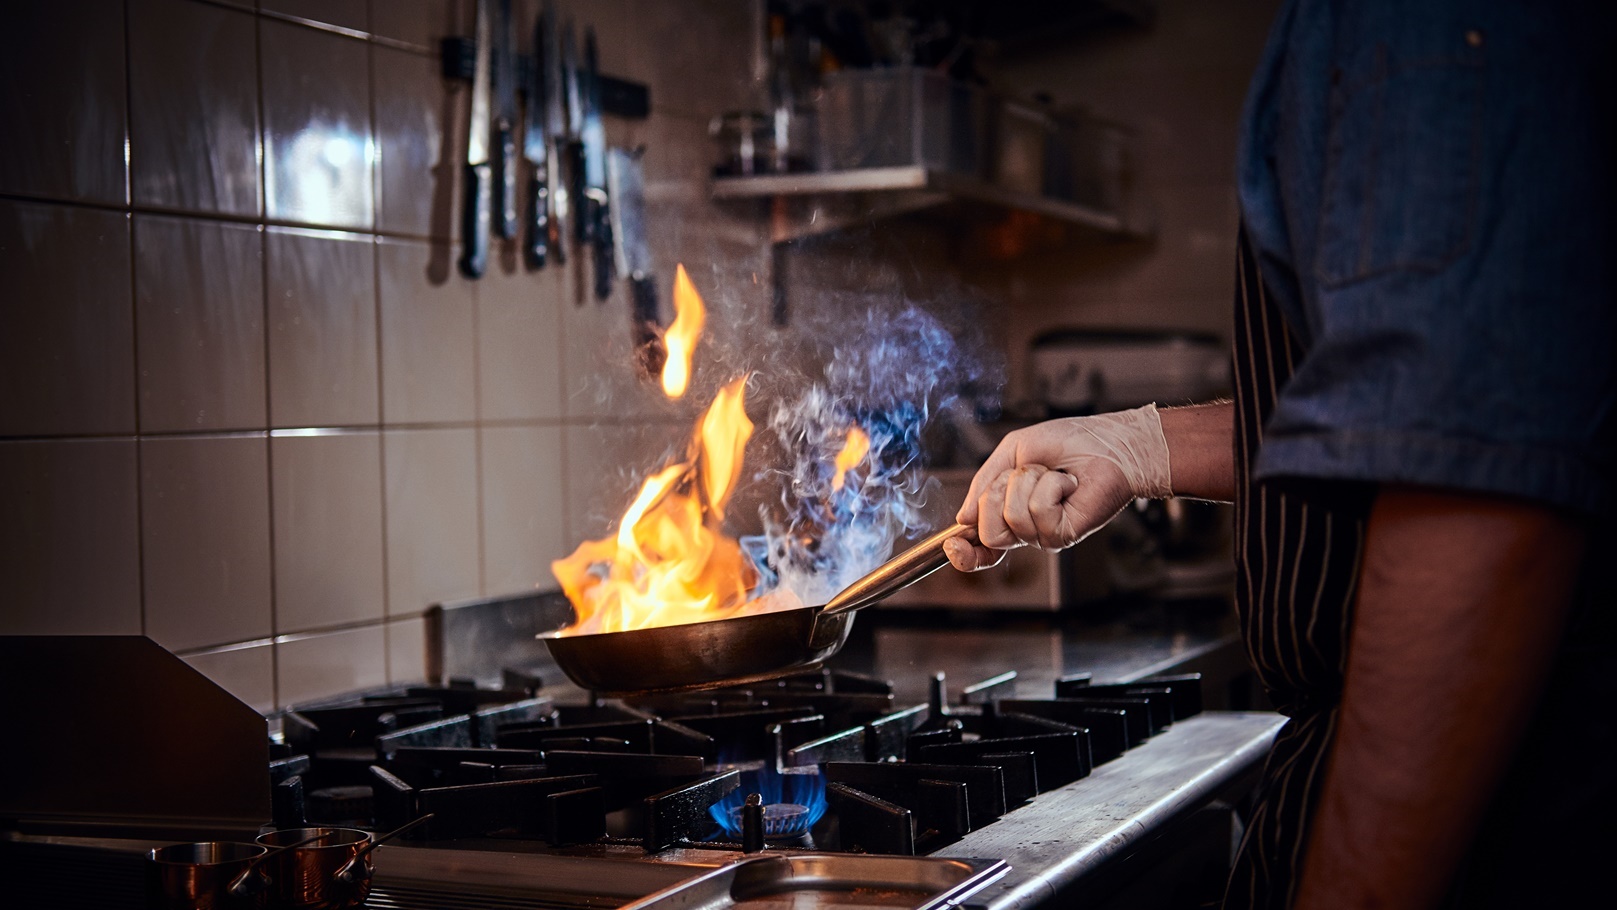 cooker-wearing-gloves-and-apron-frying-flambe-on-a-2021-08-27-23-57-19-utc